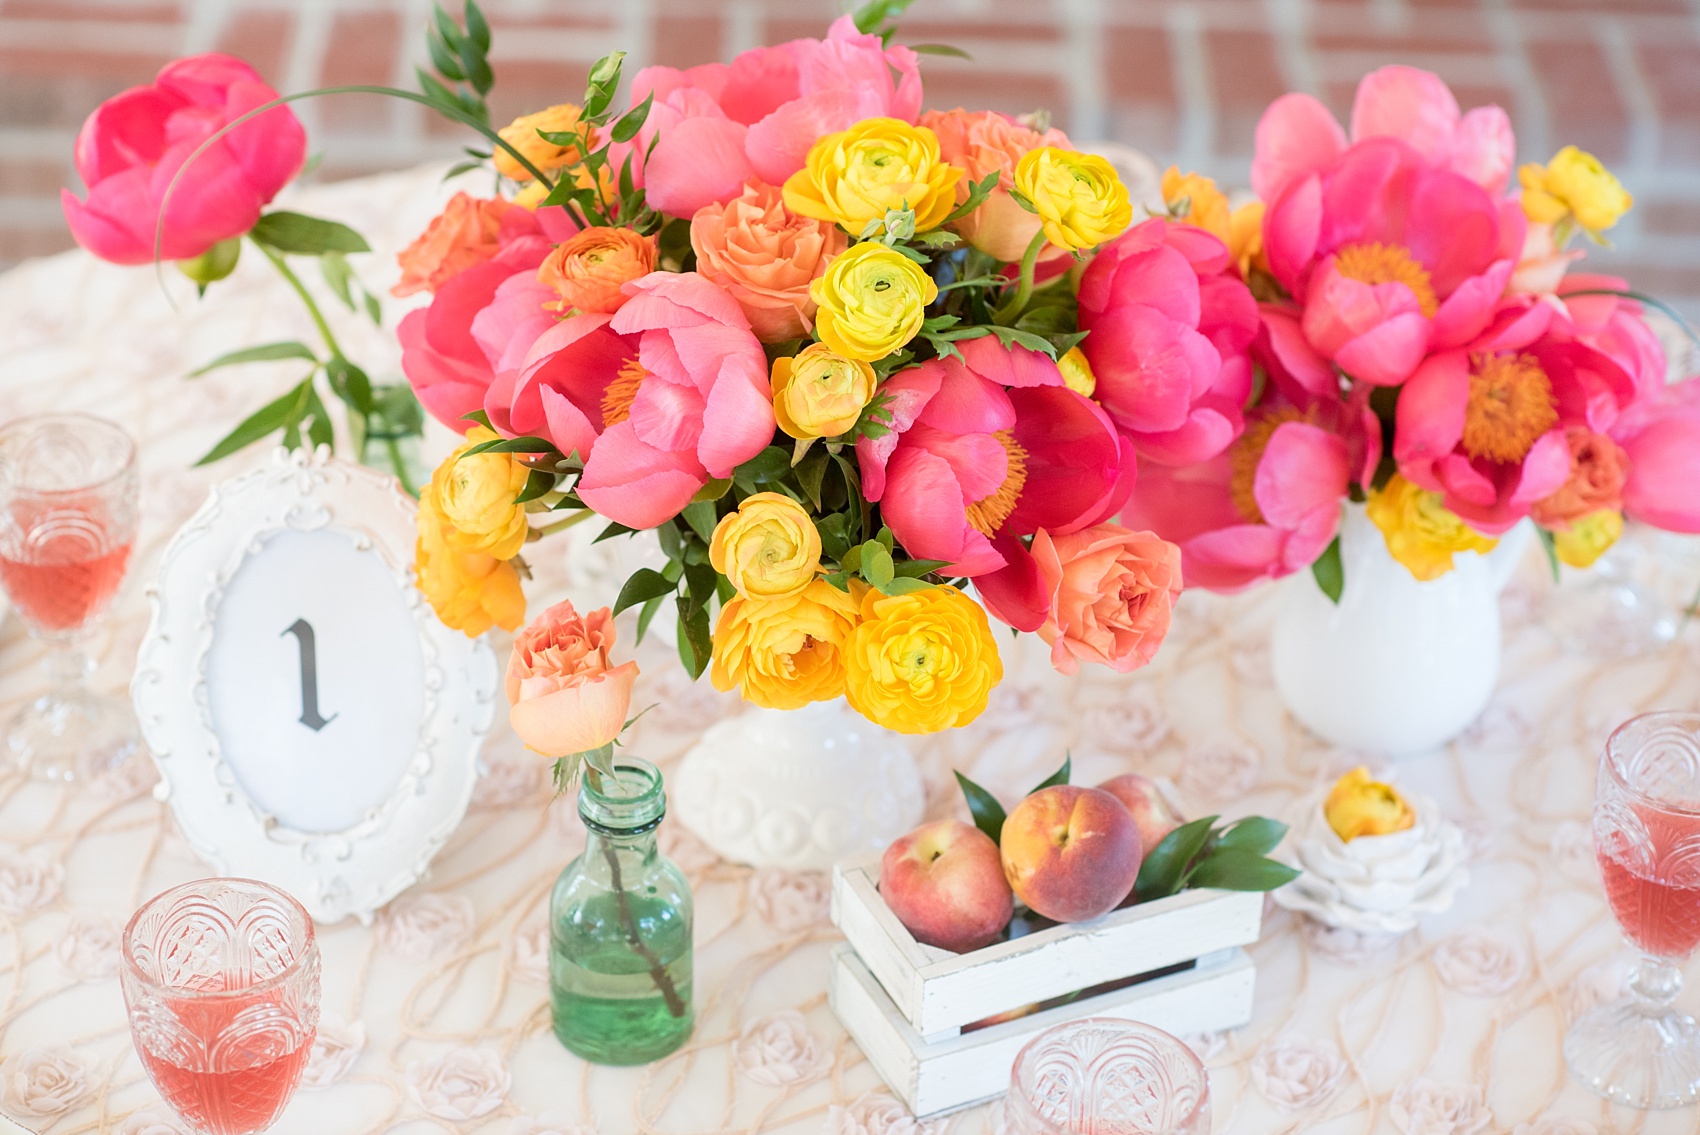 Mikkel Paige Photography wedding photo at The Bradford, NC. Modern pink, black and white table setup. Peonies and ranunculus and shabby chic peach holders.